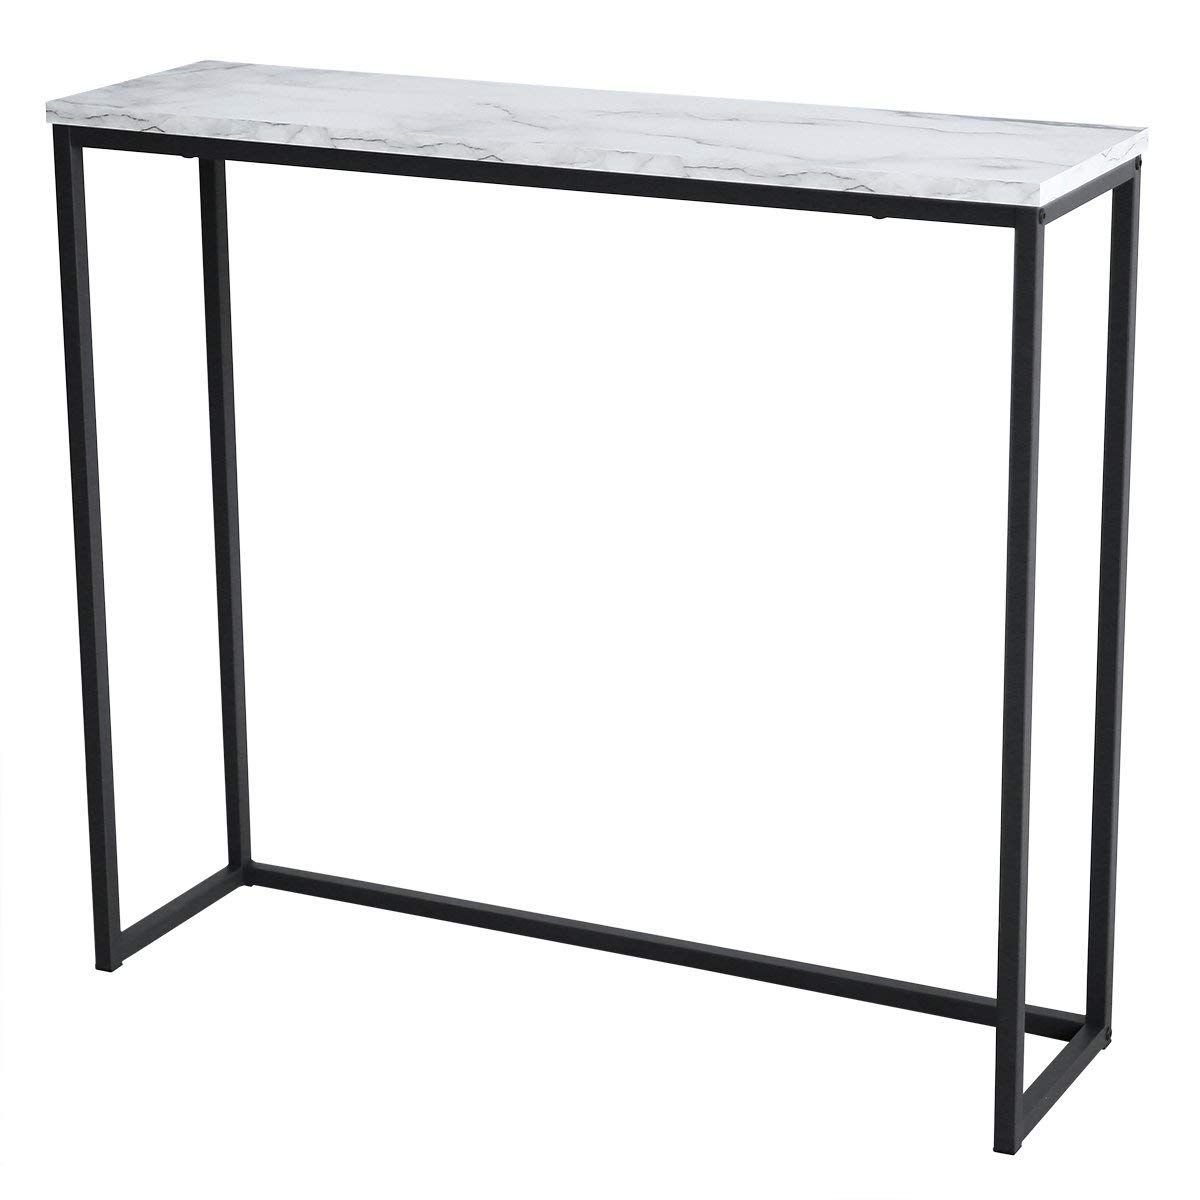 Modern Accent Faux Marble Console Table, Black Metal Frame Pertaining To White Marble Gold Metal Console Tables (View 6 of 20)